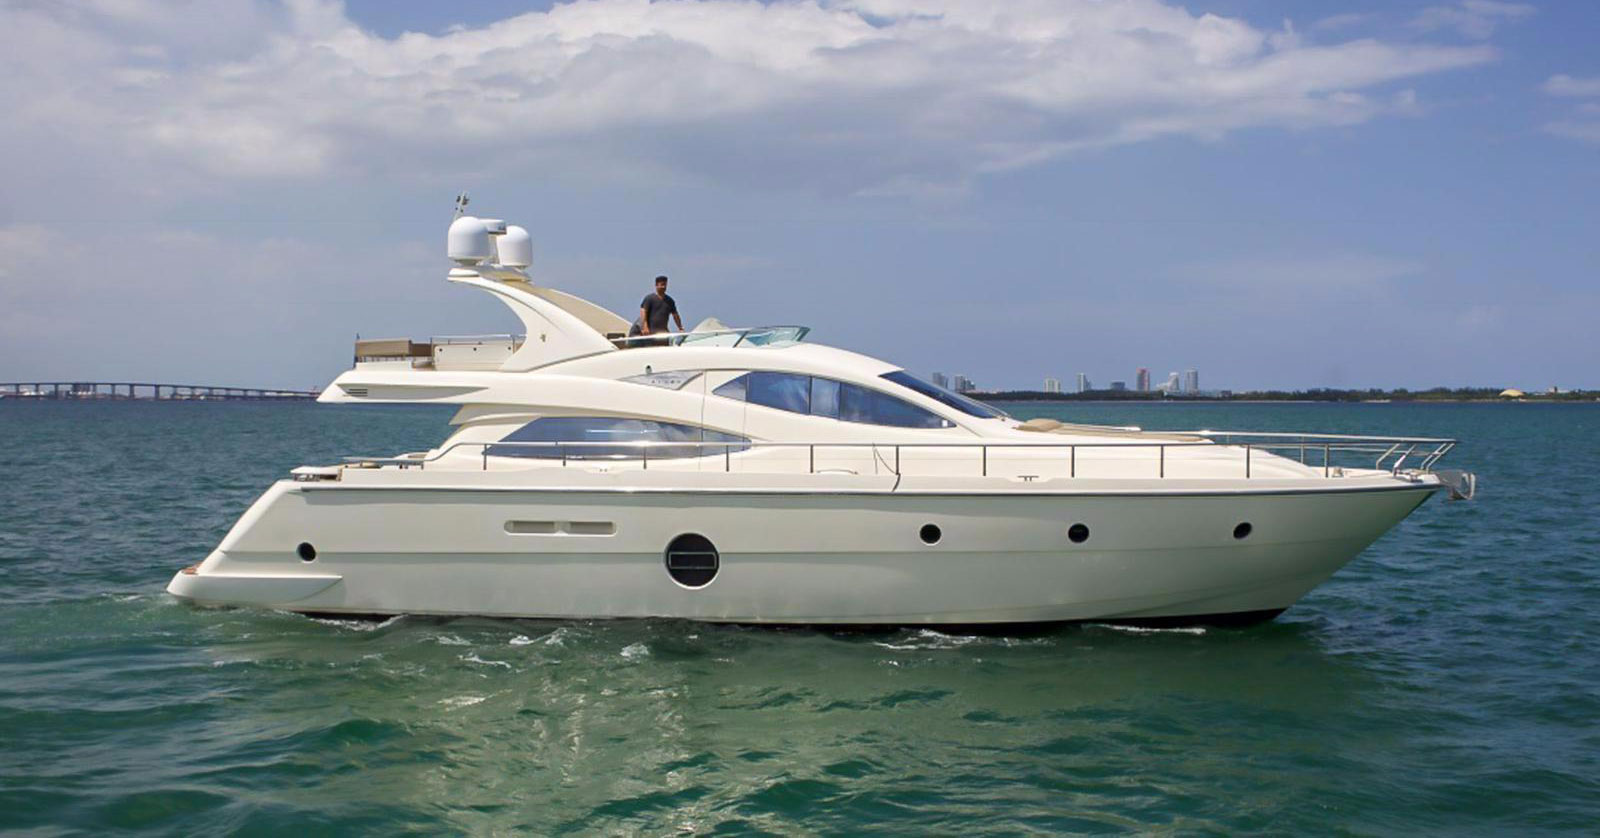 Co-op Yacht Ownership Offers Hassle-Free Fun